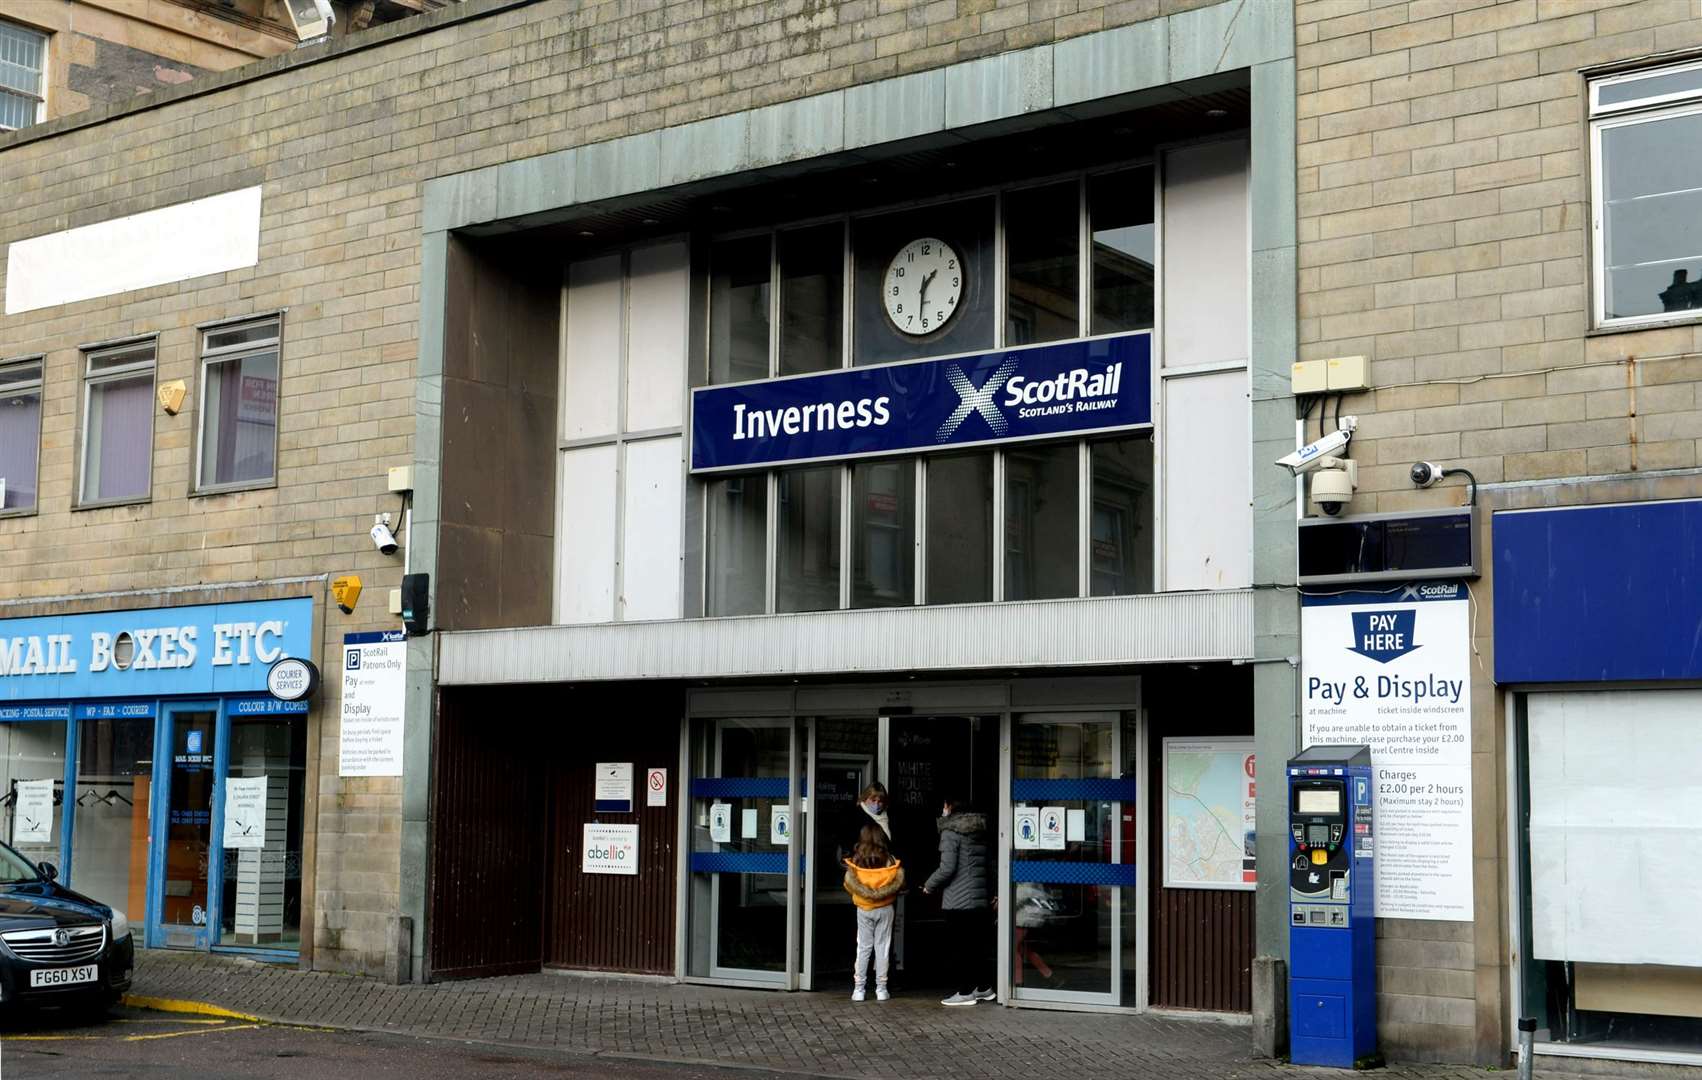 Services to and from Inverness are likely to be impacted over the festive period.